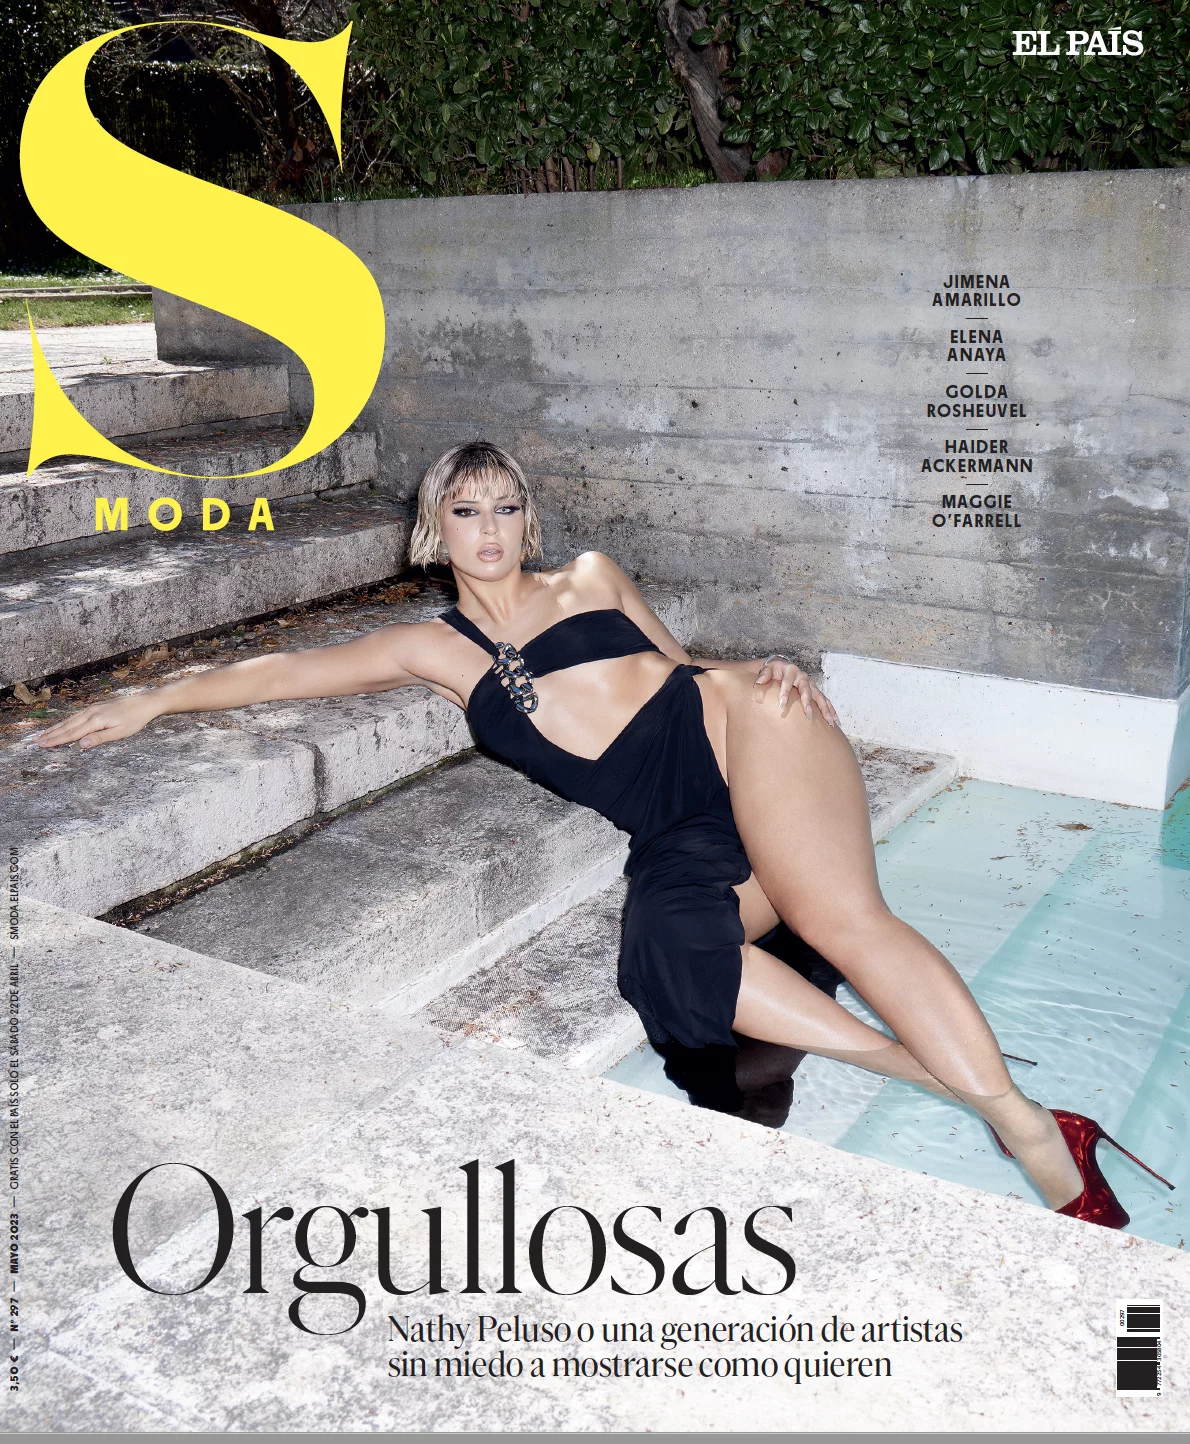 S Moda with Nathy Peluso 2 by Claire ROTHSTEIN